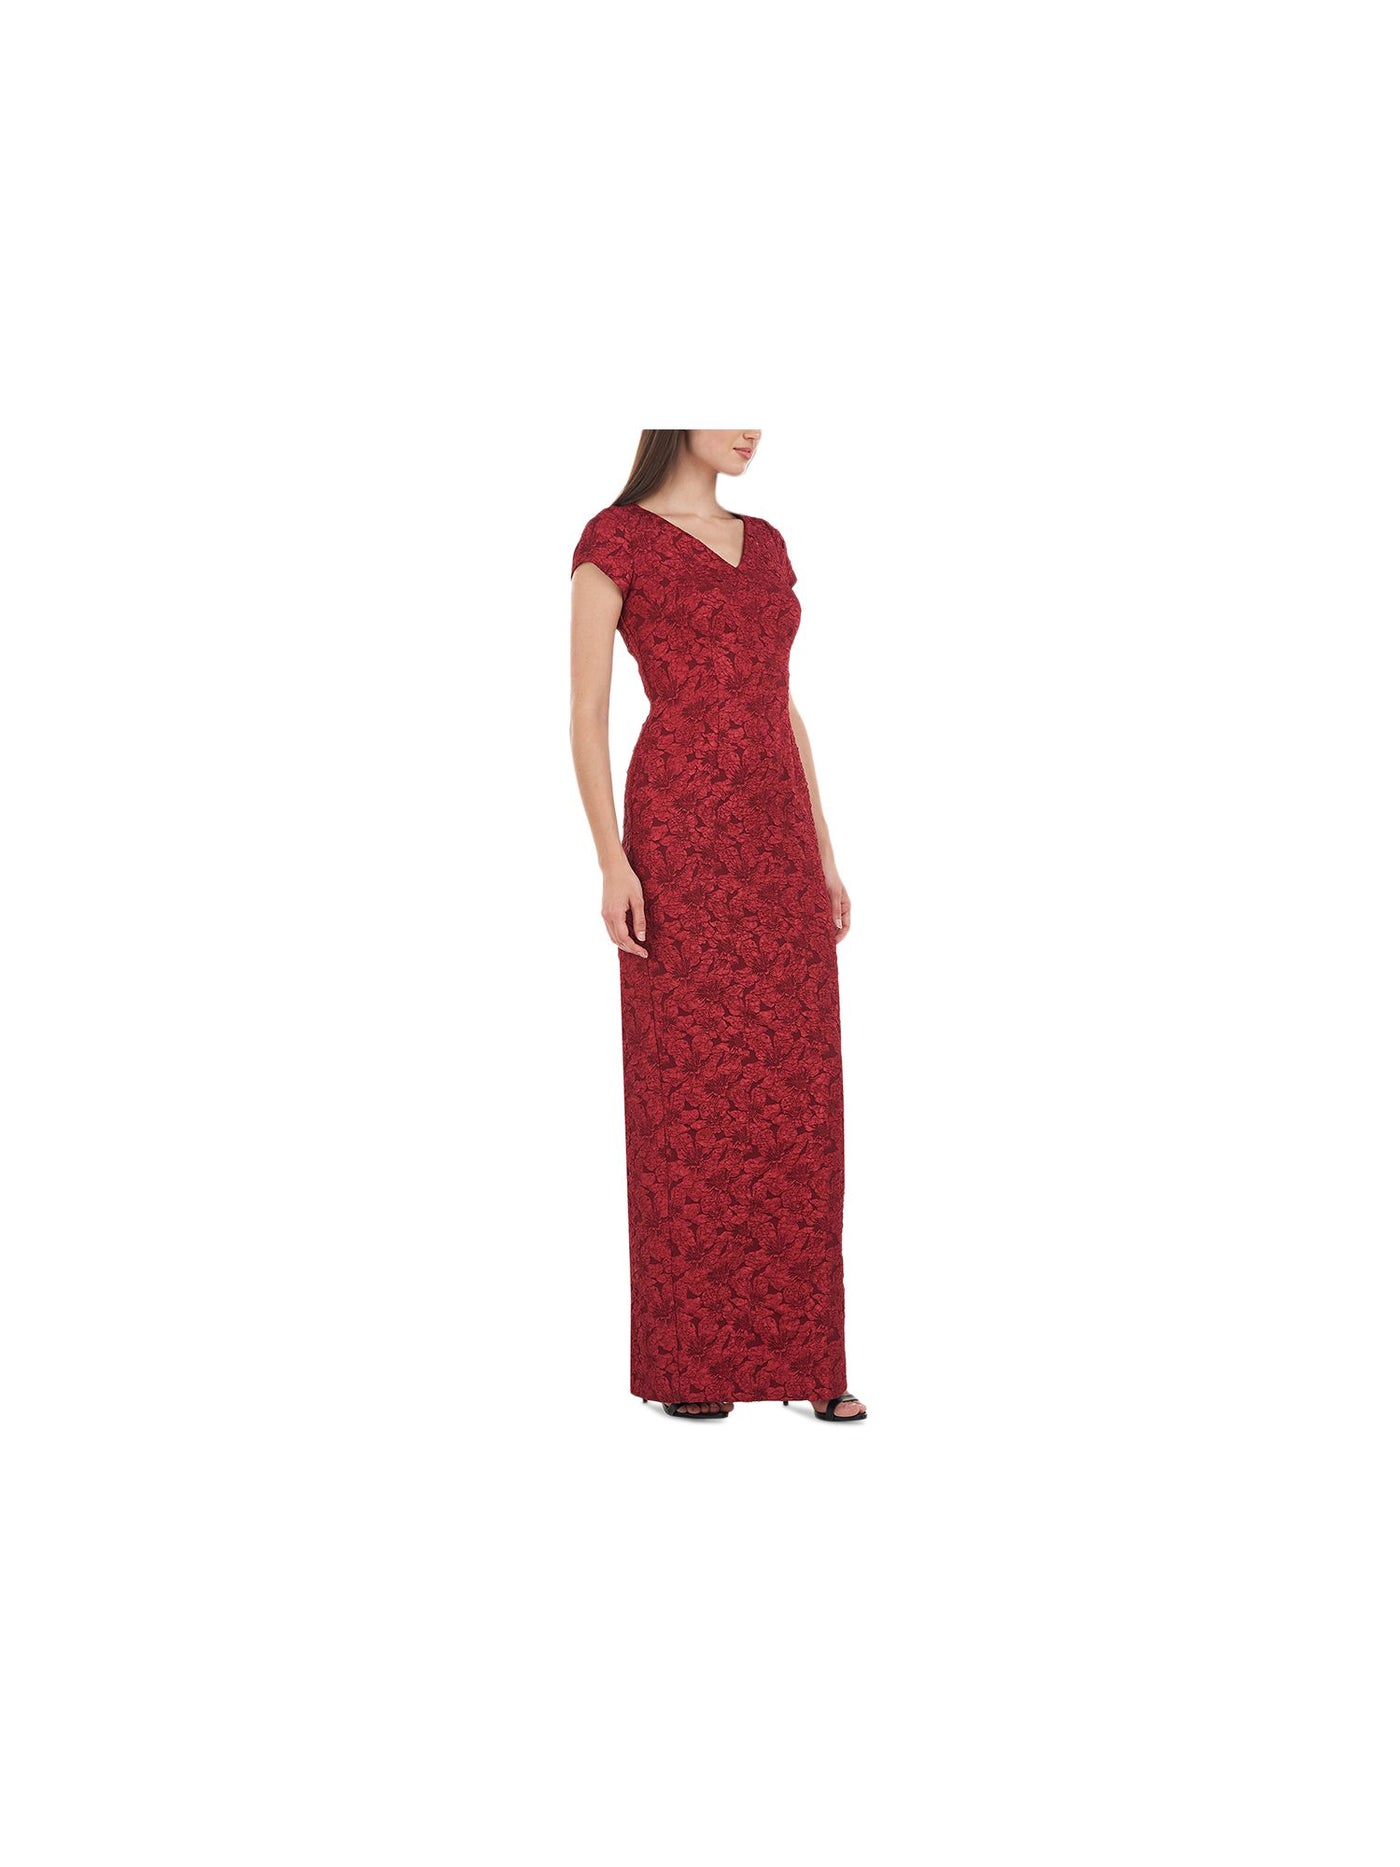 JS COLLECTIONS Womens Red Zippered Slitted Lined Darted Textured Floral Cap Sleeve V Neck Full-Length Evening Gown Dress 12